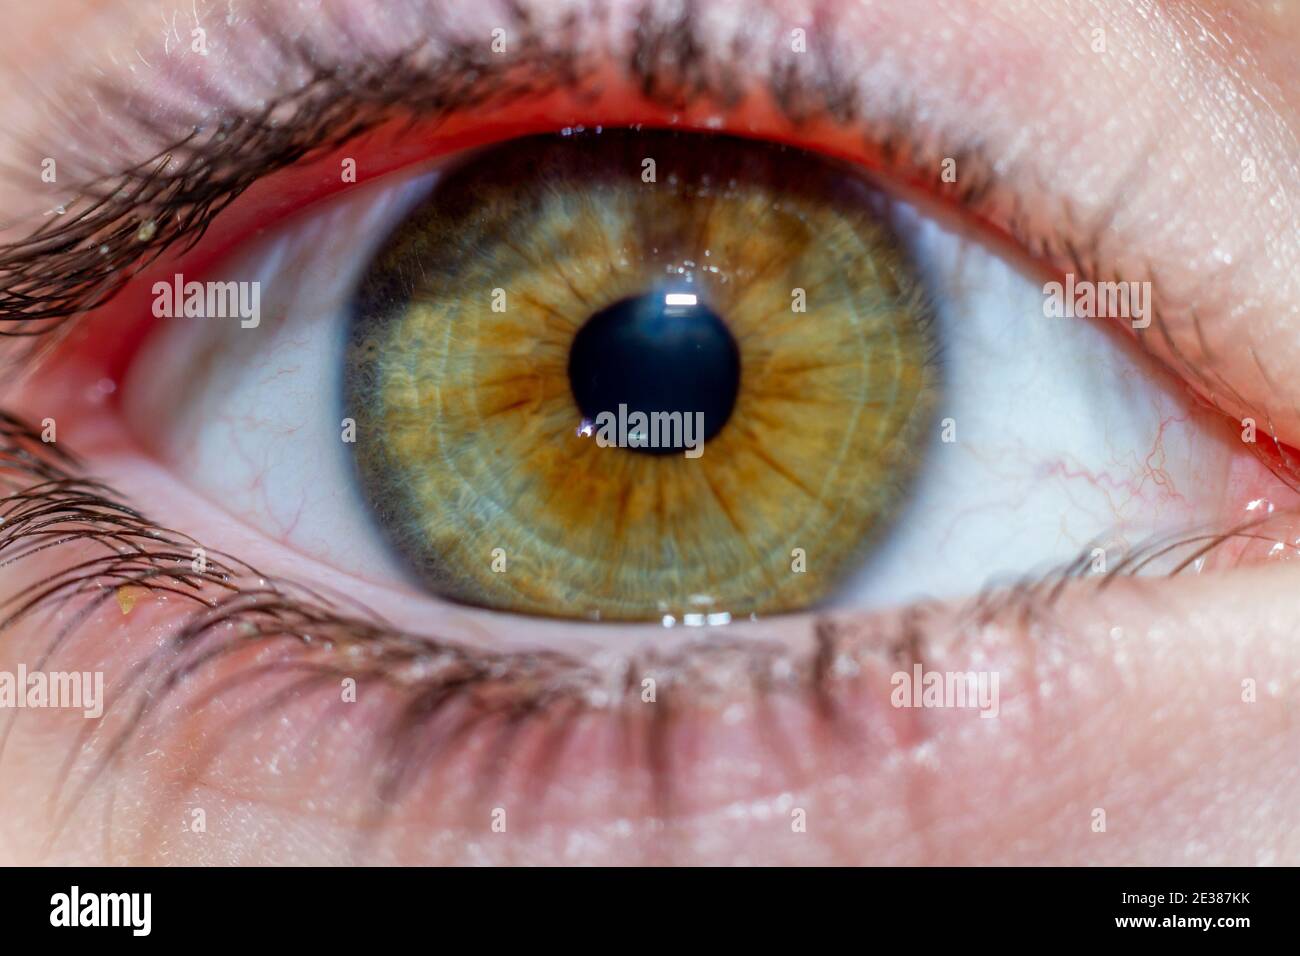 Right eye of a girl with green and brown colored irises Stock Photo - Alamy